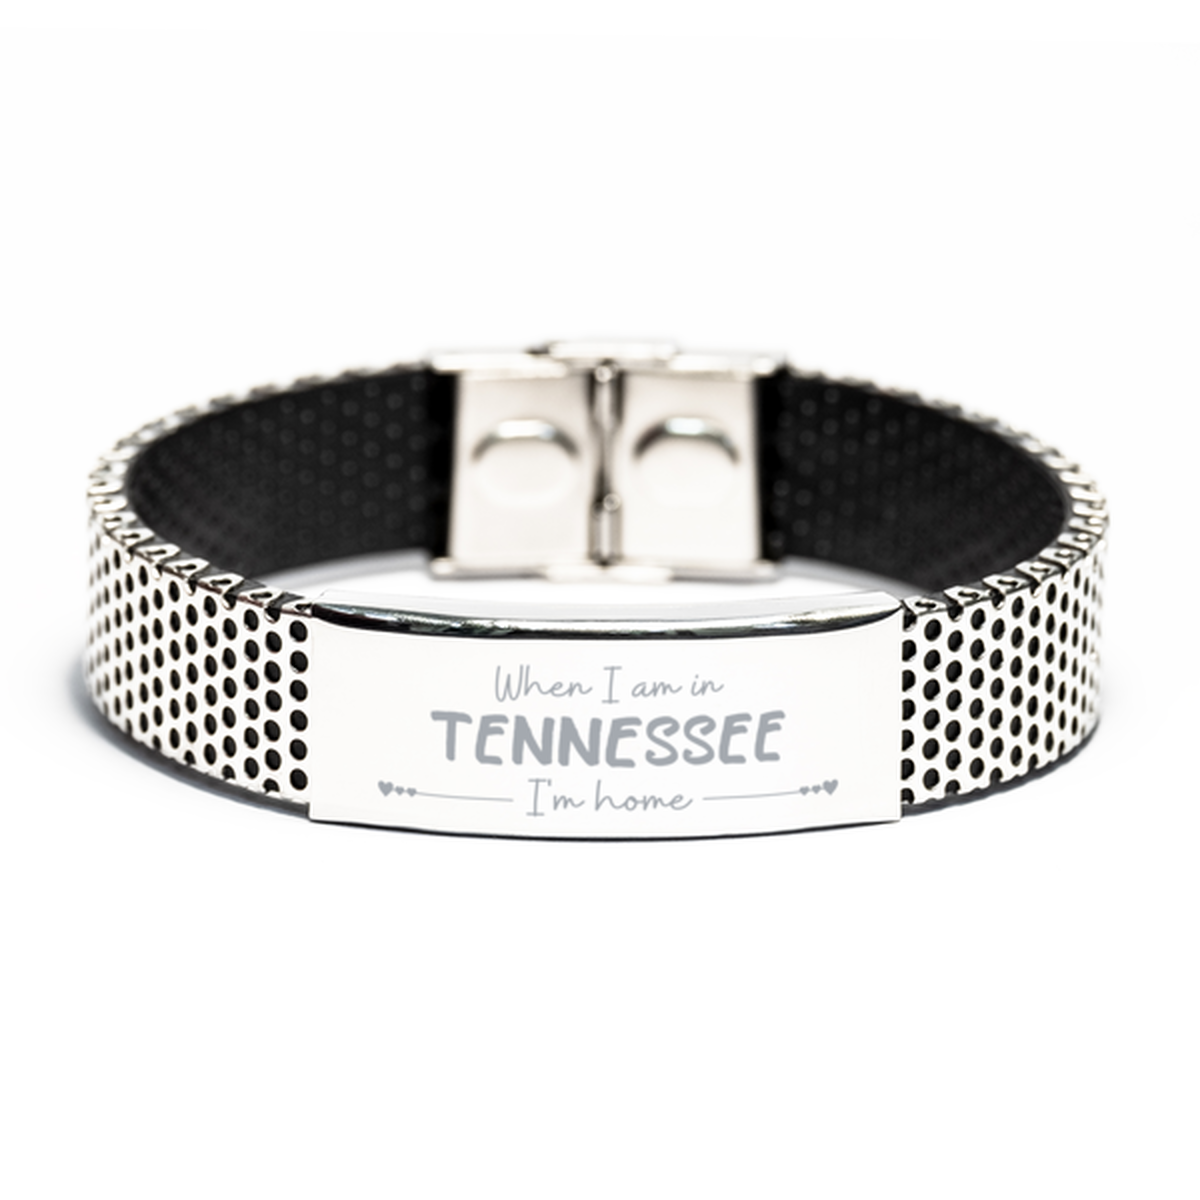 When I am in Tennessee I'm home Stainless Steel Bracelet, Cheap Gifts For Tennessee, State Tennessee Birthday Gifts for Friends Coworker